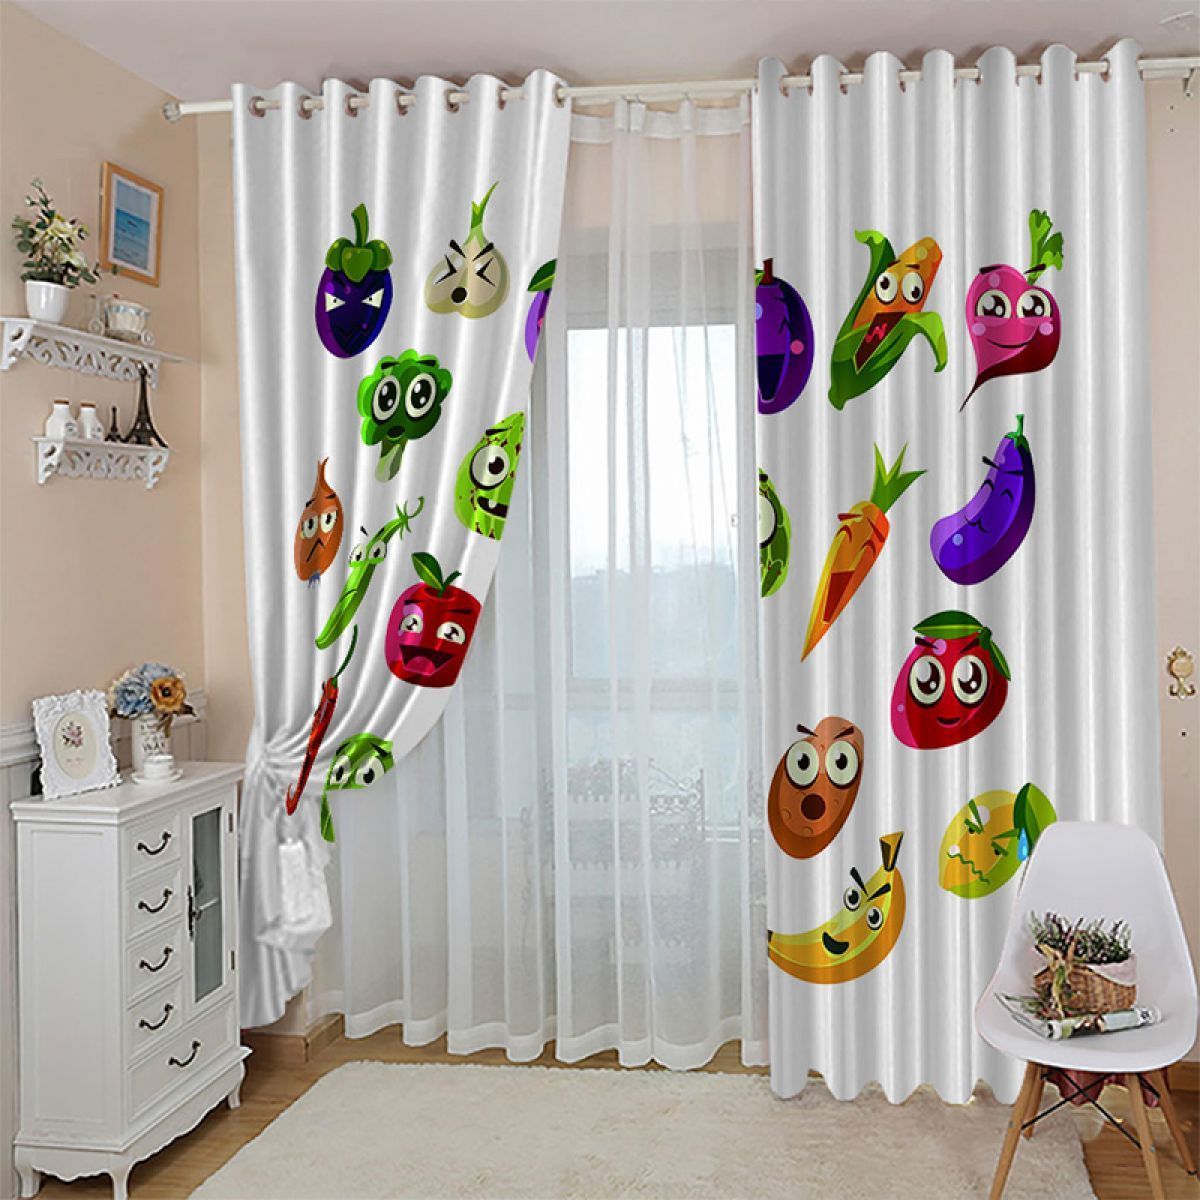 3d Cartoon Fruits And Vegetables Printed Window Curtain Home Decor